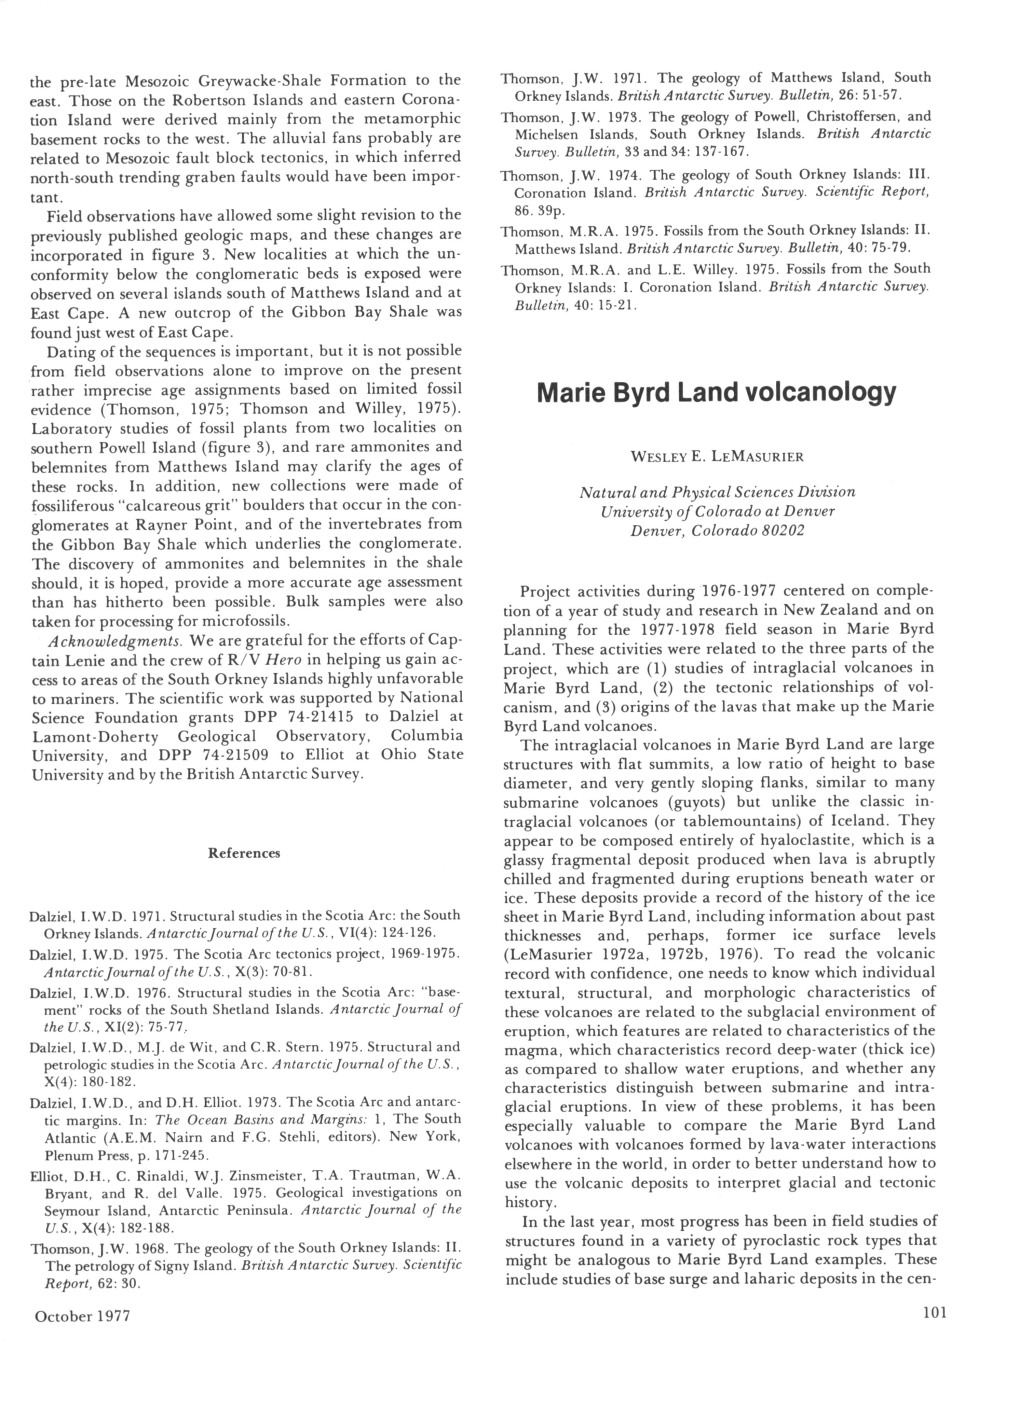 Marie Byrd Land Volcanology Evidence (Thomson, 1975; Thomson and Willey, 1975)